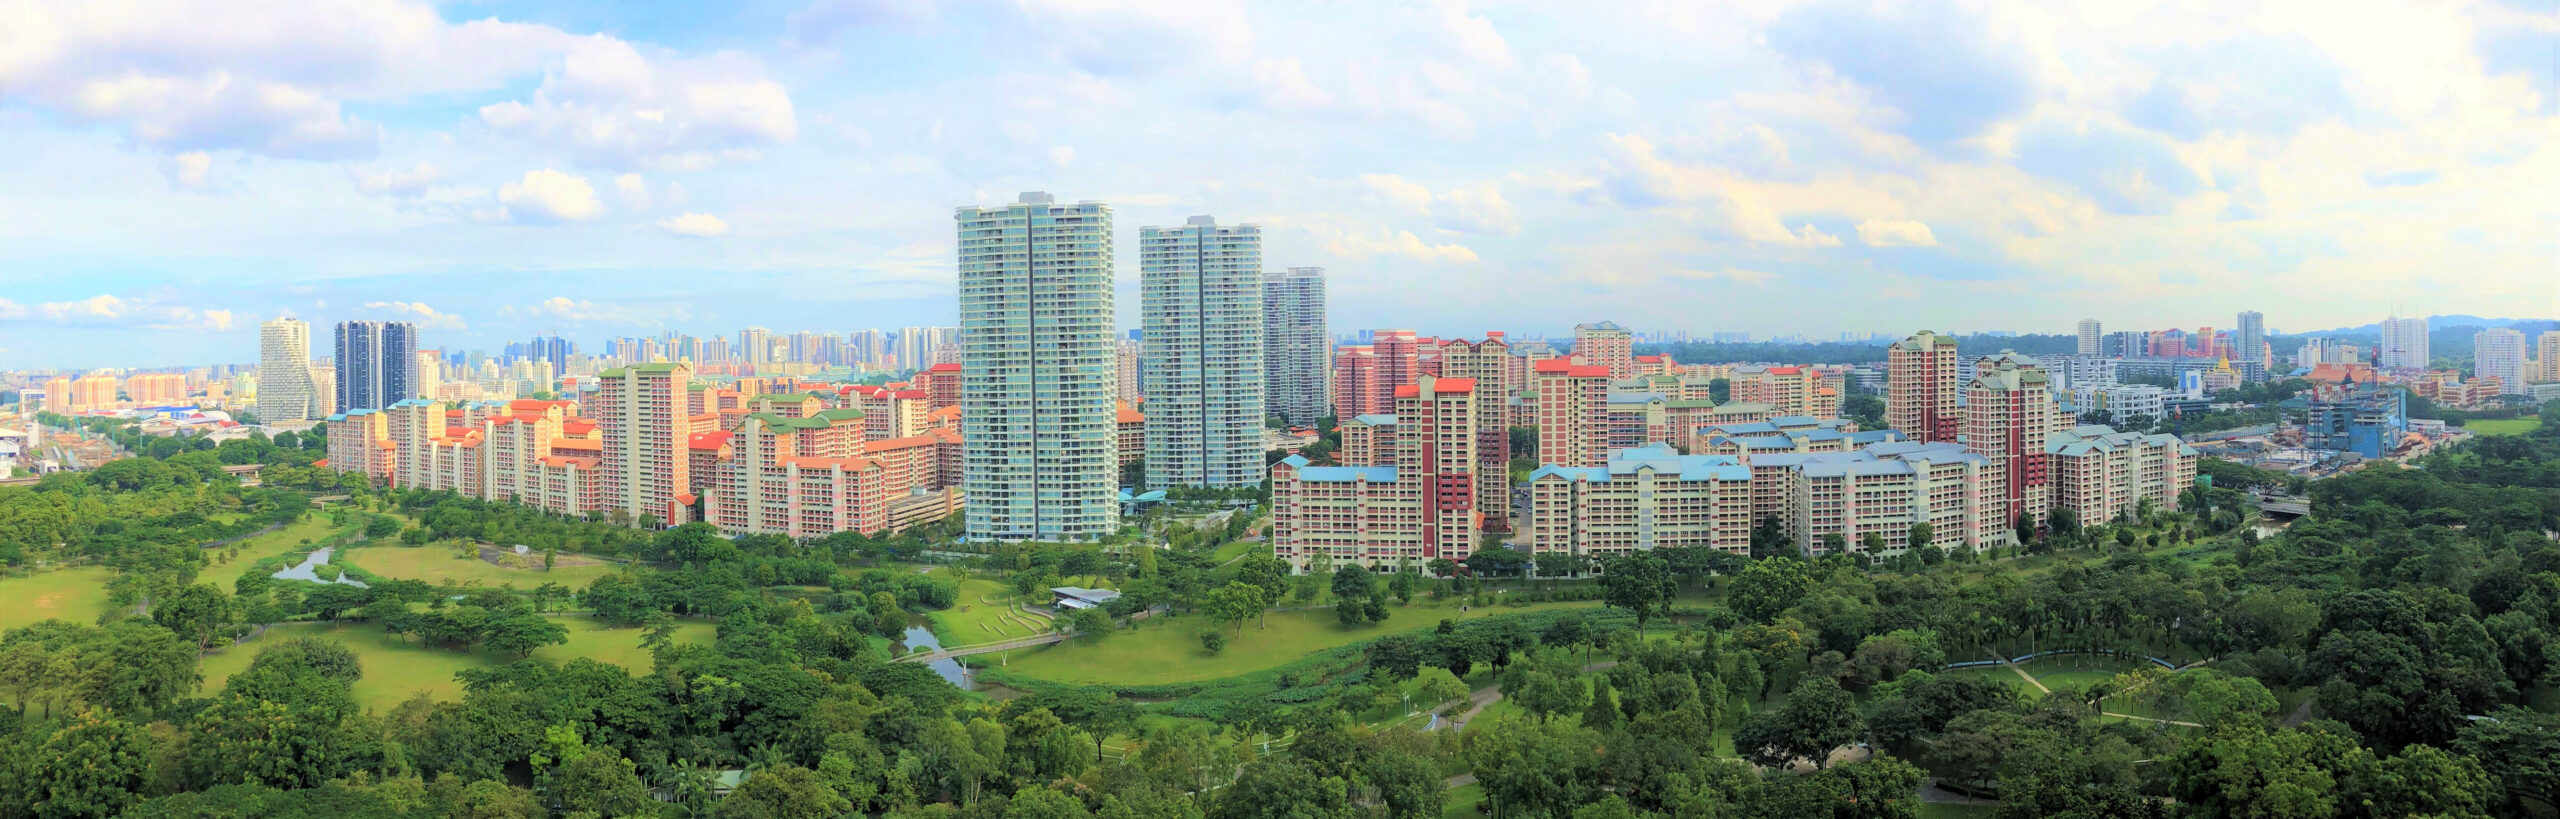 A spectacular, panoramic view of the park and HDBs at Bishan